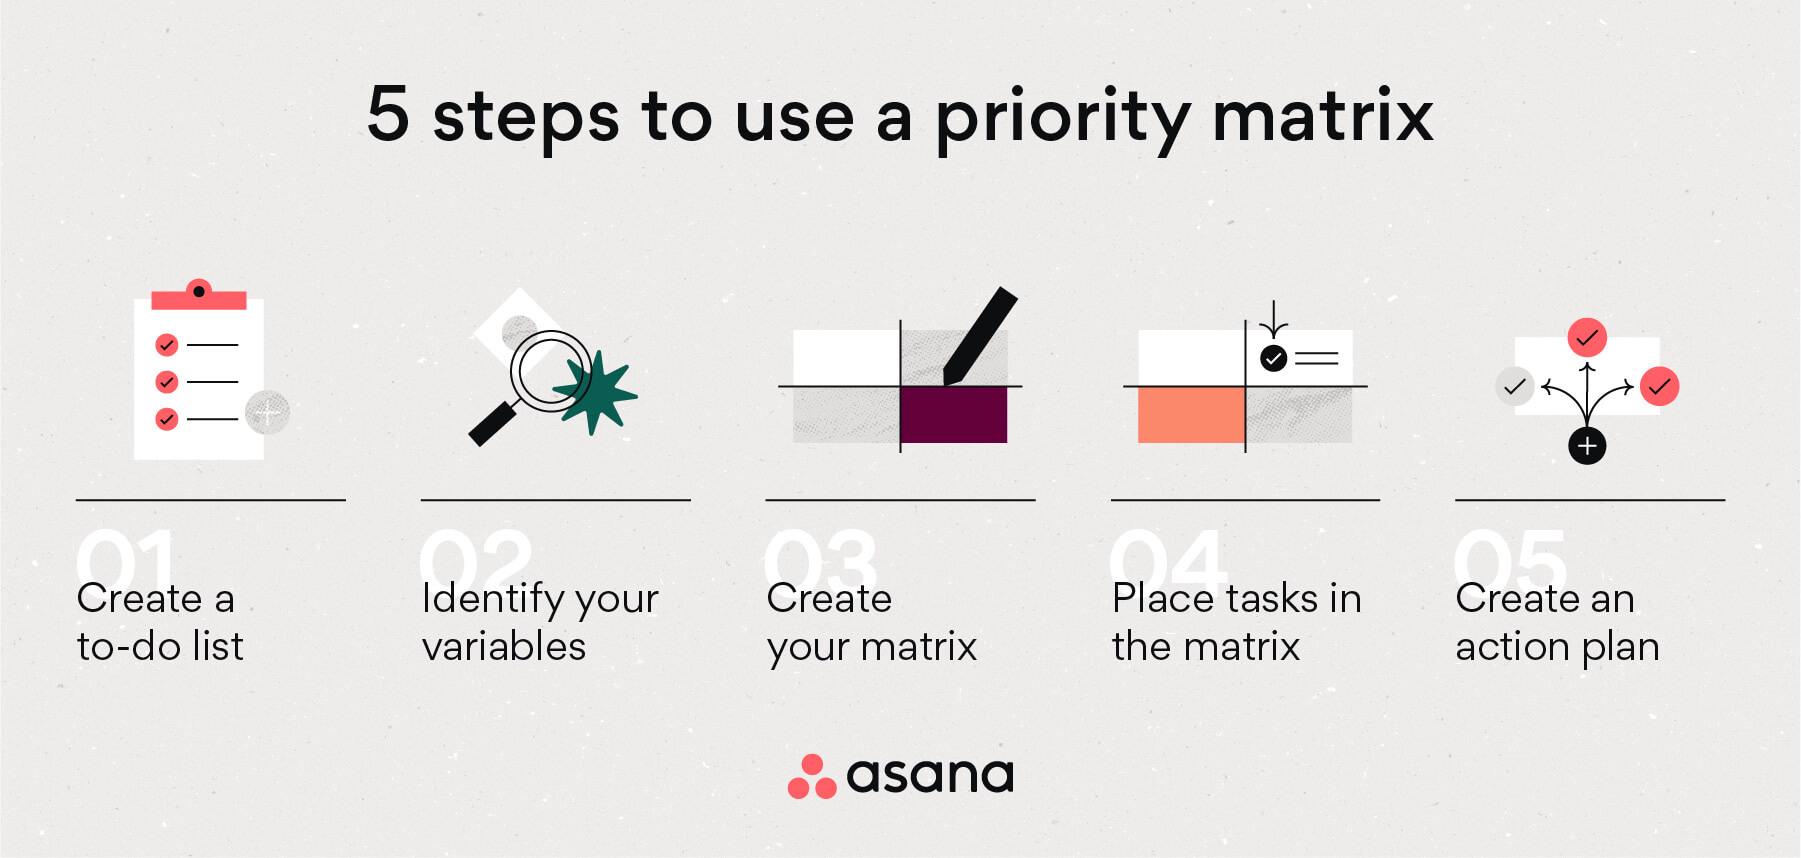 [inline illustration] 5 steps to use a priority matrix (infographic)